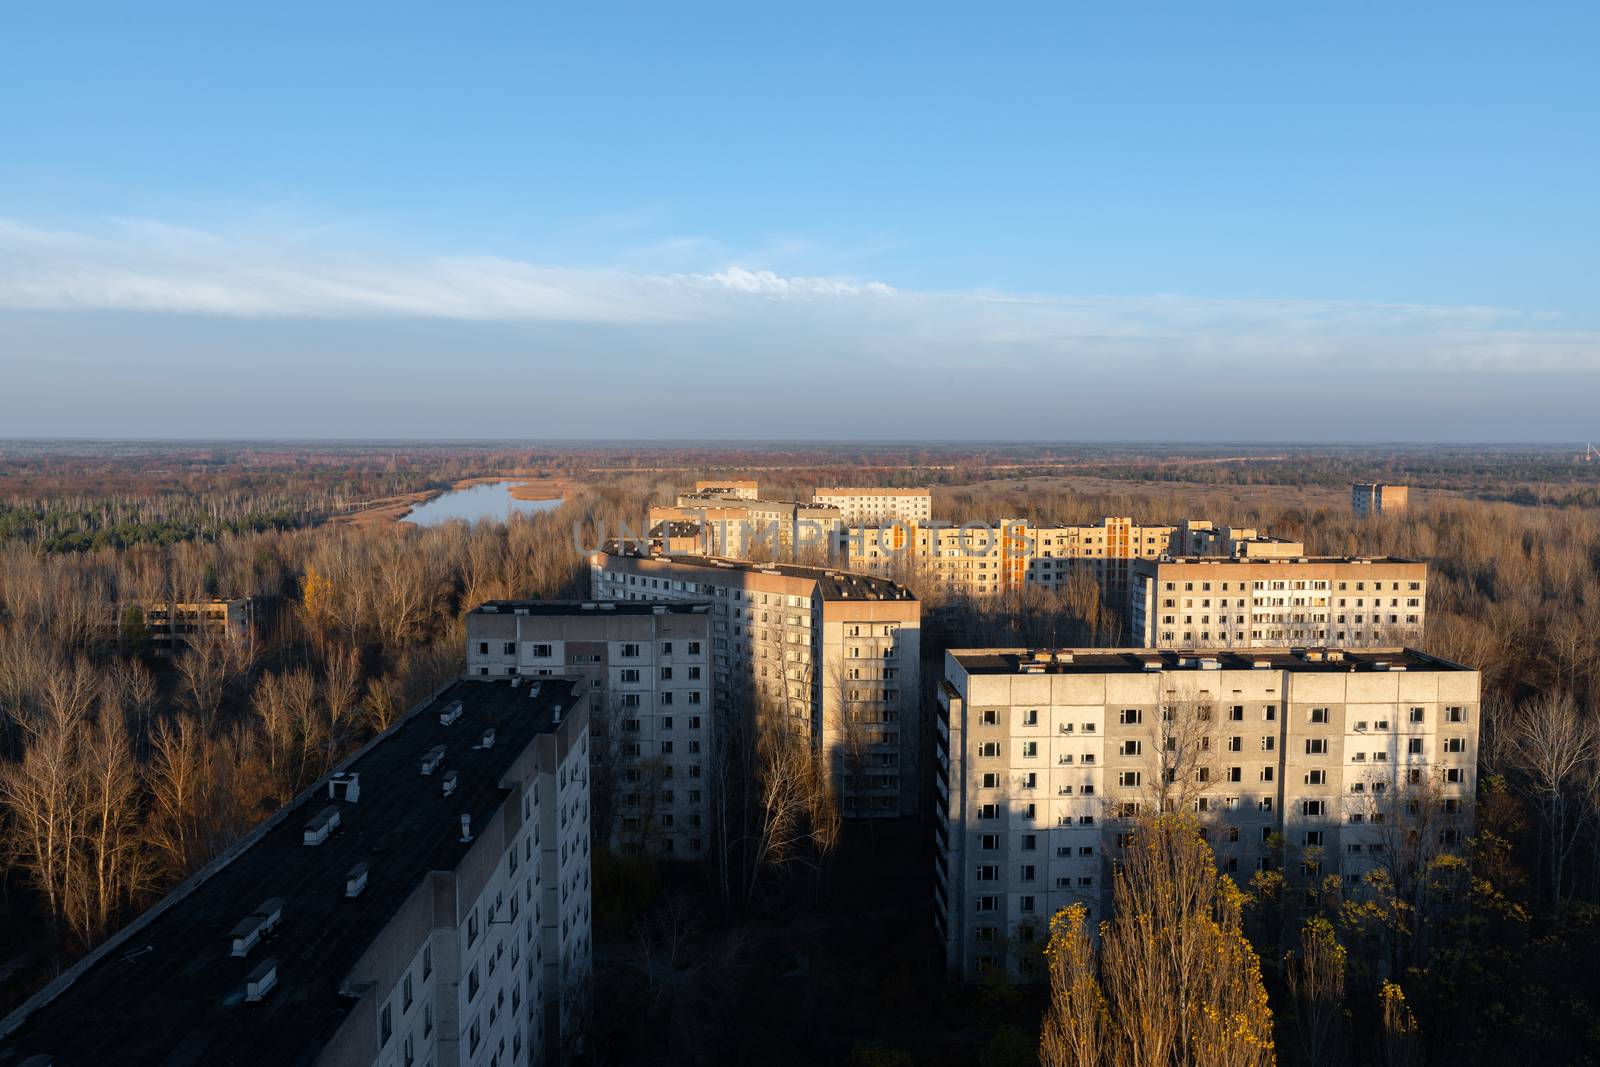 Abandoned Cityscape in Pripyat, Chernobyl Exclusion Zone 2019 by svedoliver